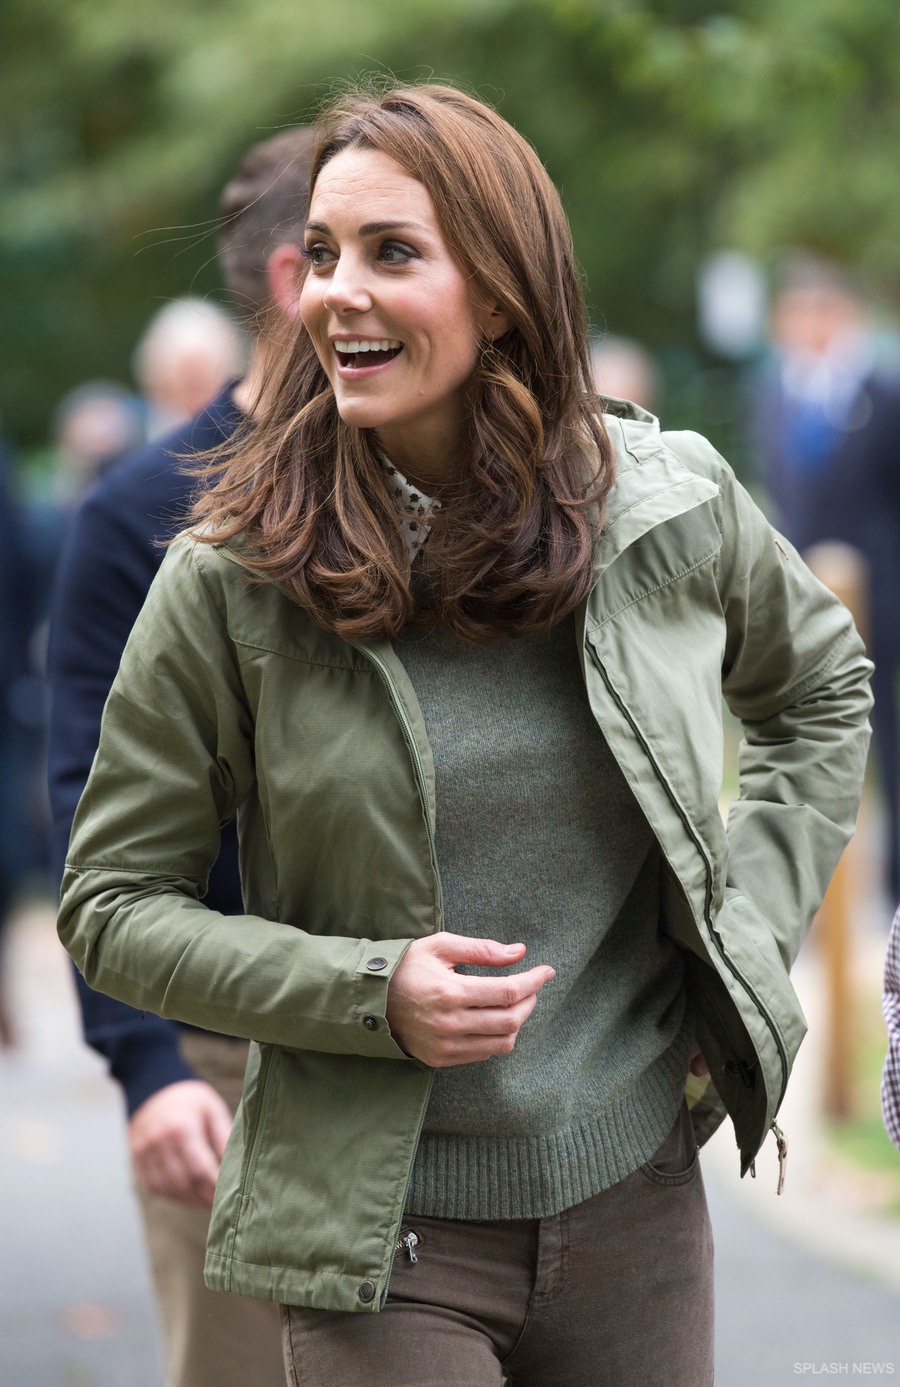 Kate Middleton wearing the Fjall Raven Stina jacket in either green or fog